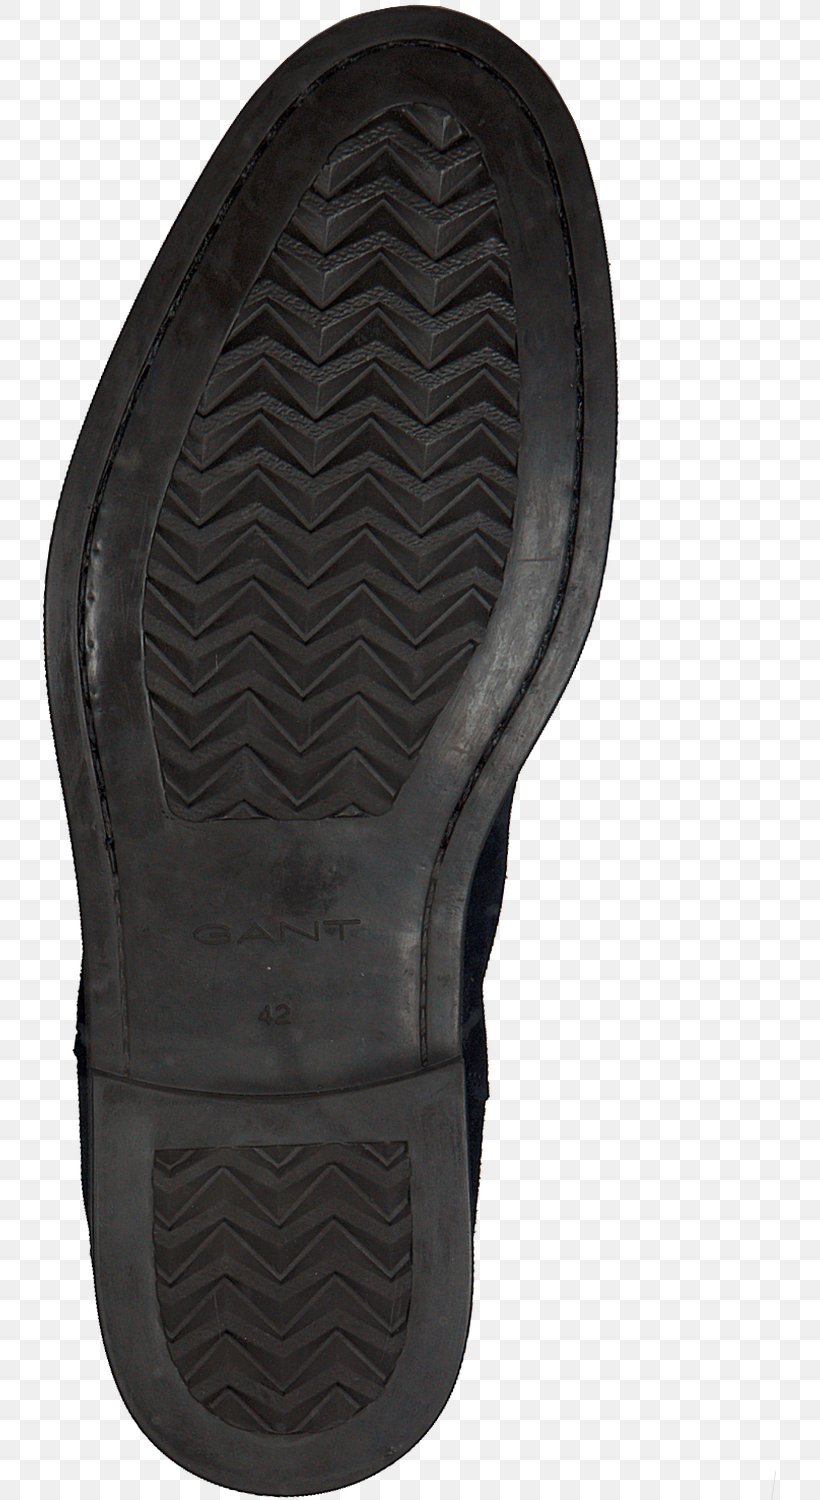 Chelsea Boot Shoe Industrial Design Product Design, PNG, 749x1500px, Chelsea Boot, Boat, Boot, Footwear, Gant Download Free